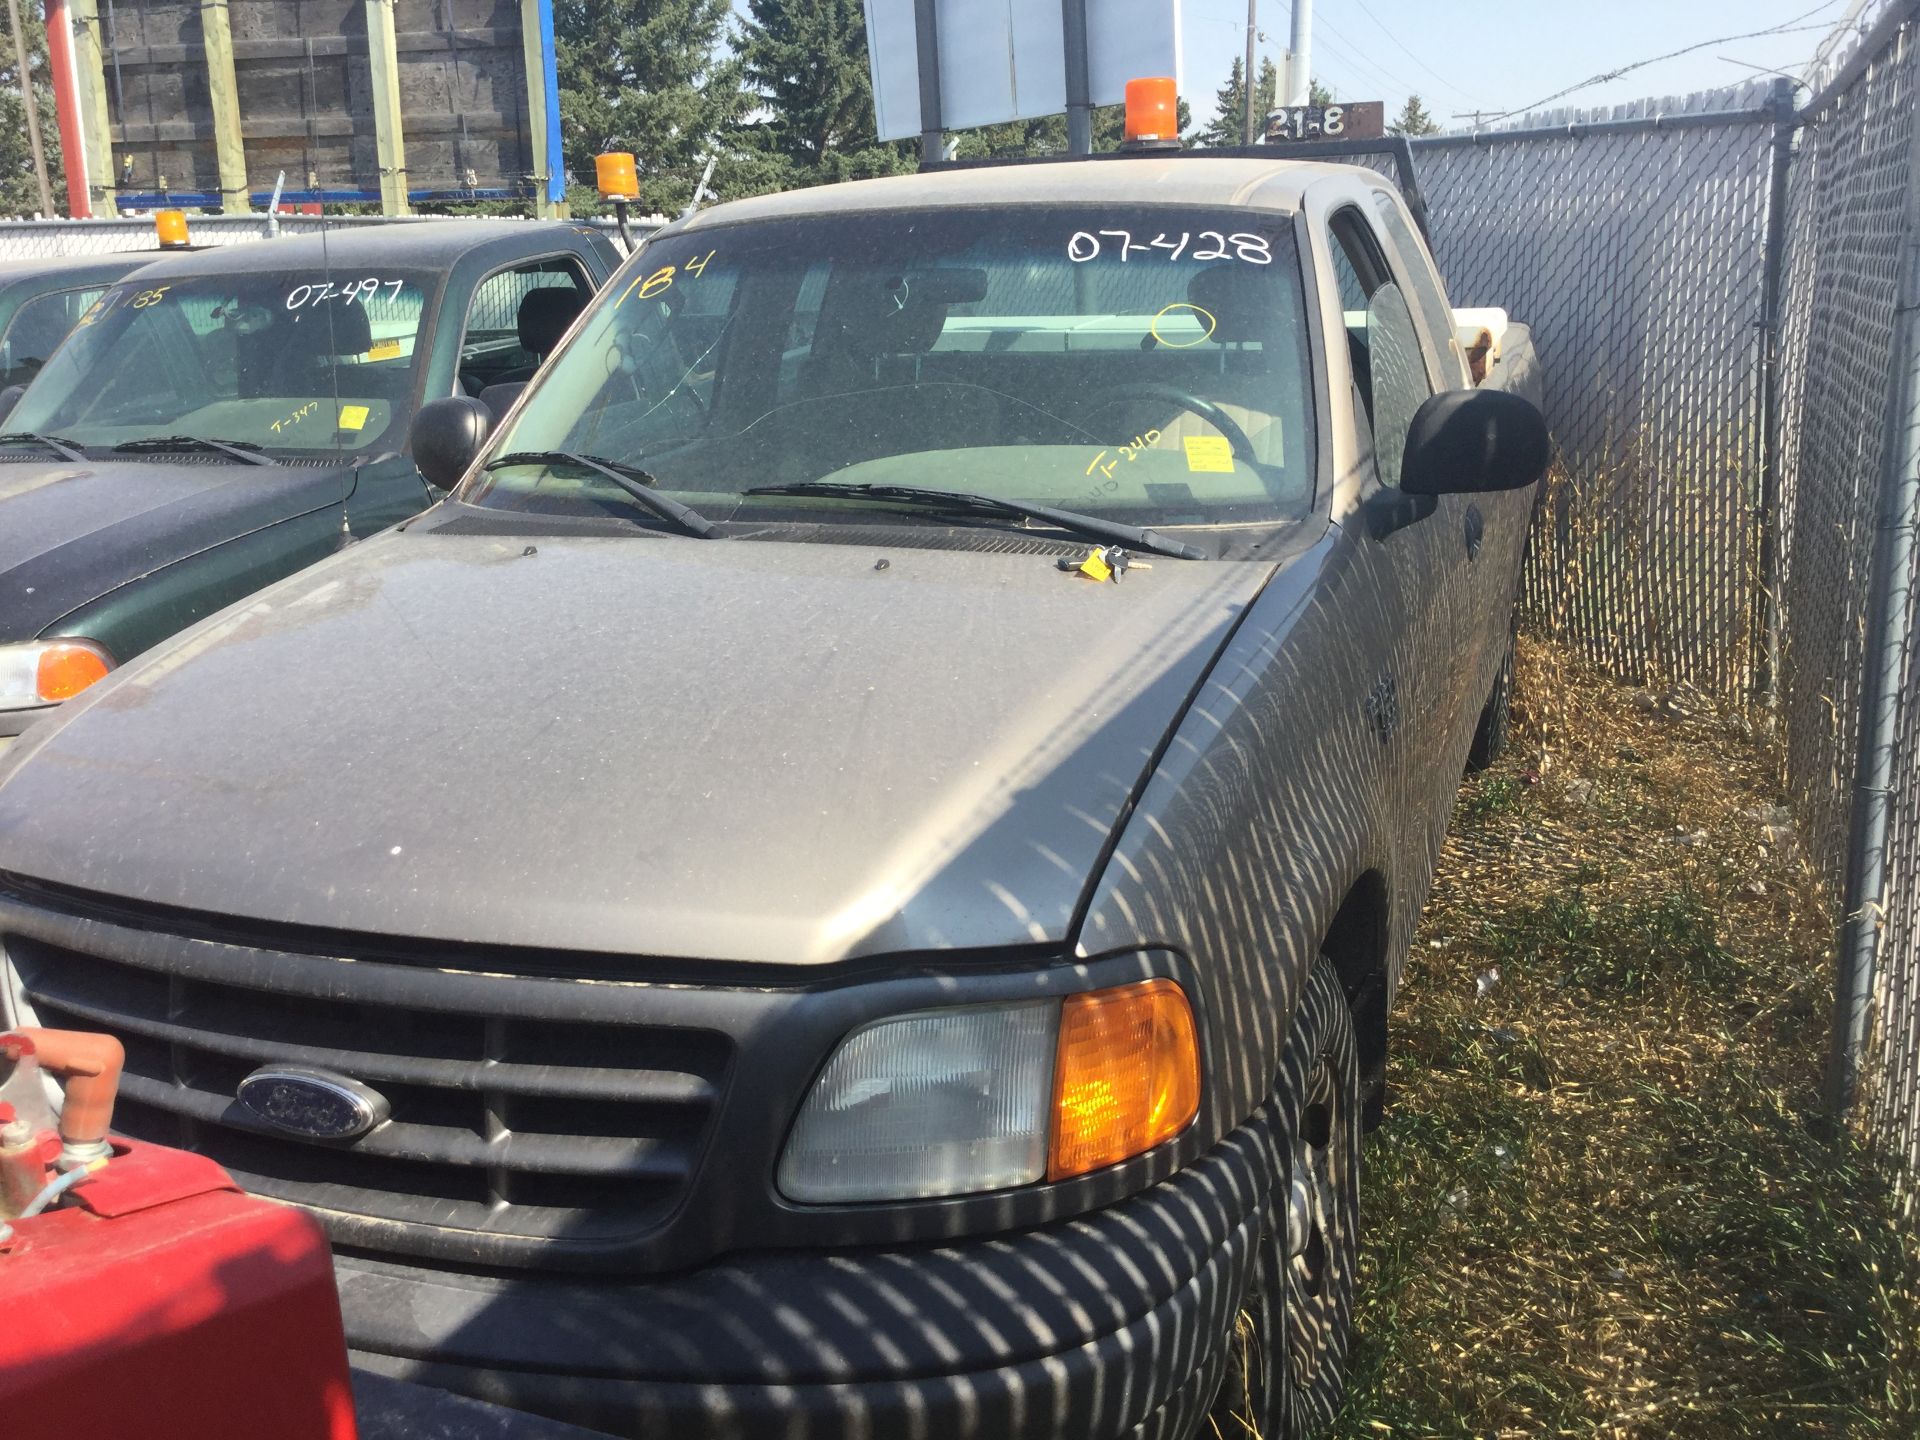 Year: 2004 Make: Ford Model: 1/2T Type: Pickup Vin#: A42398 Mileage/Hours: 239486 4.36L, 2WD, XC,